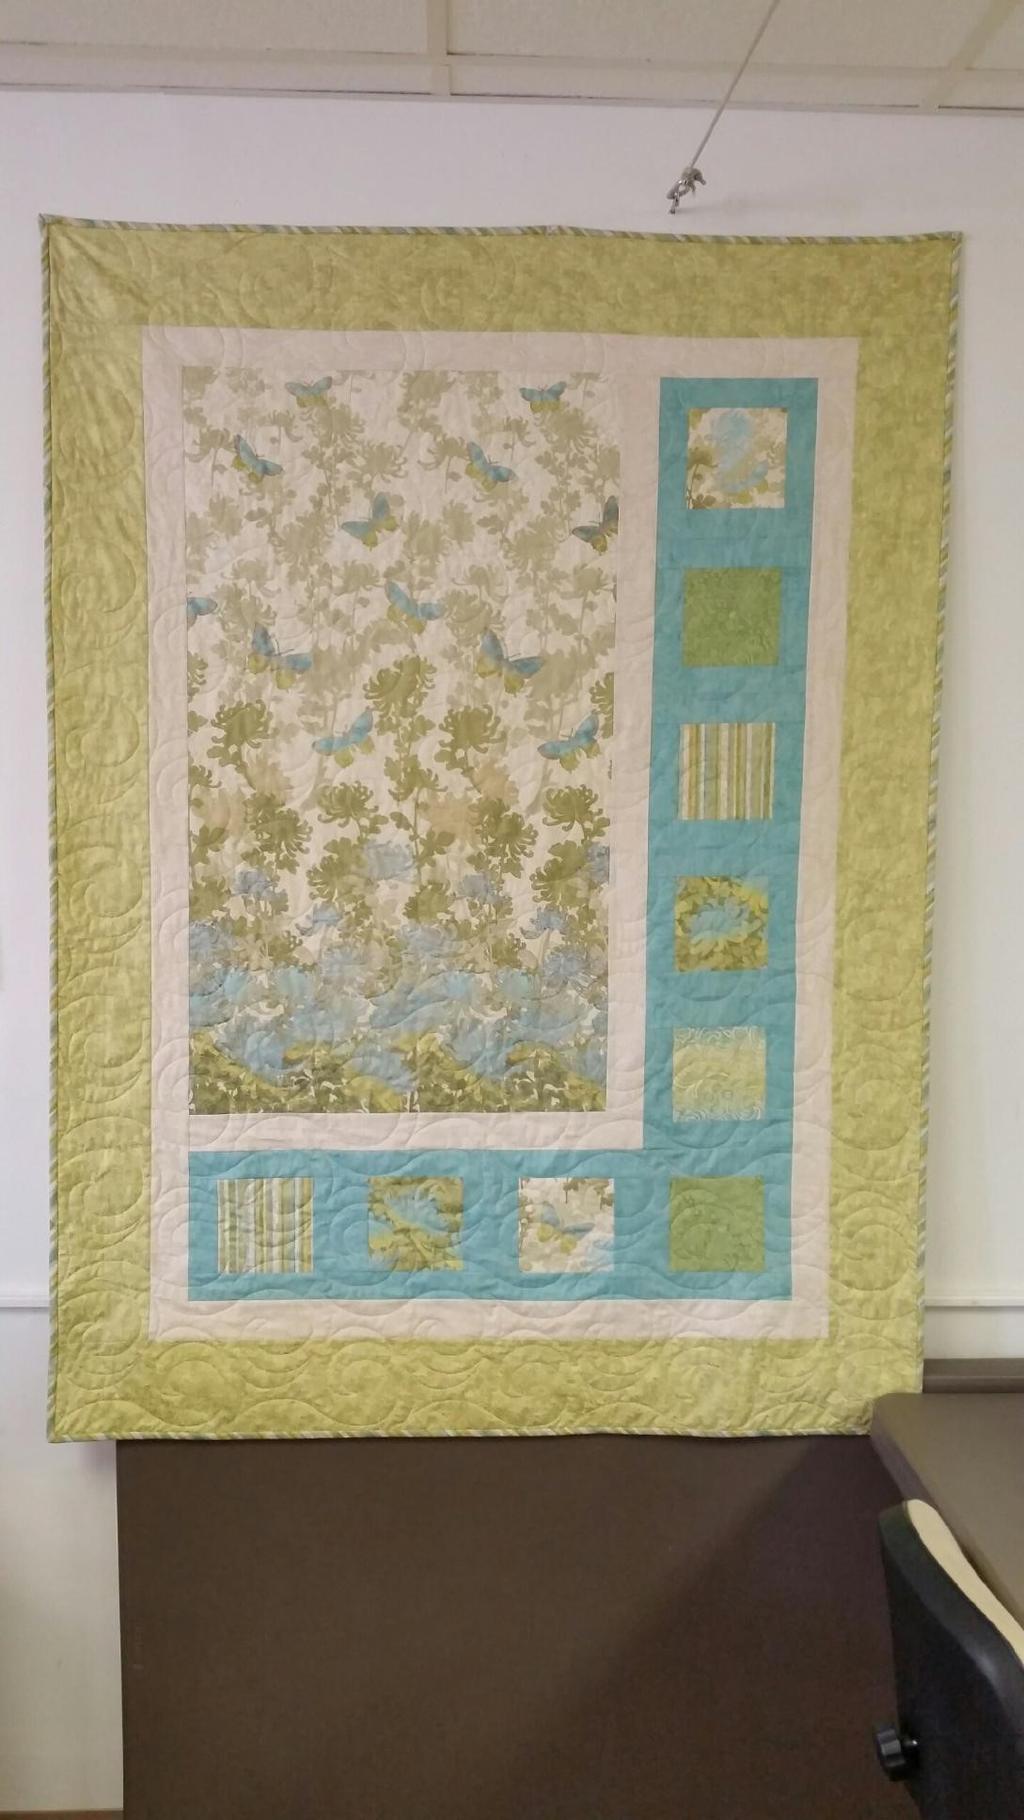 799. Sidelights - Sidelights uses a panel or large print too pretty to cut. Surround it on two sides with framed coordinating fabrics for a beautiful quilt.